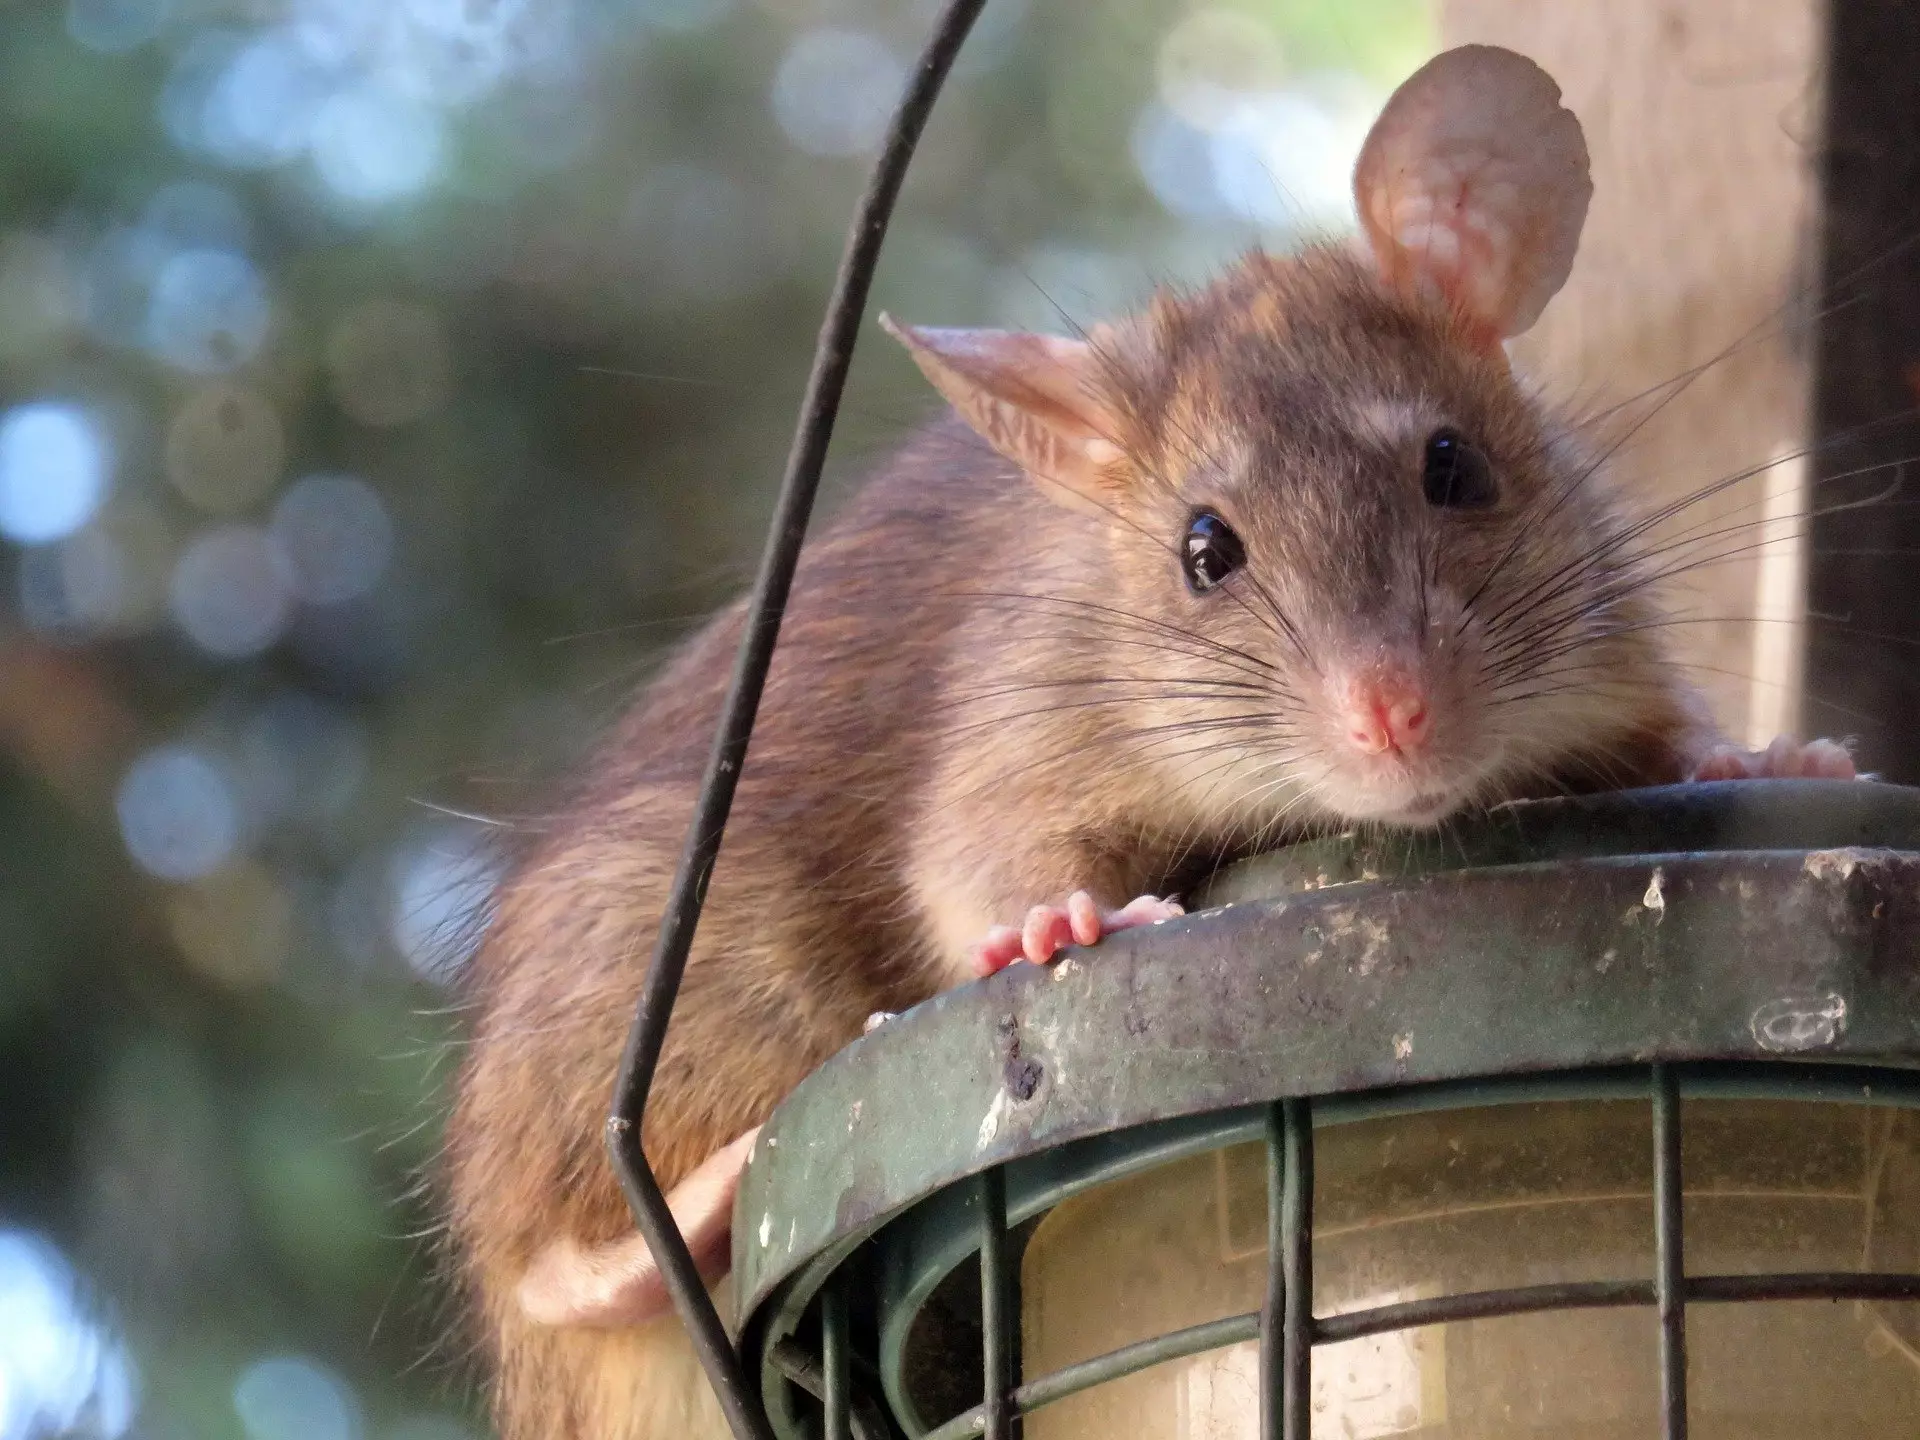 Rats are invading people's homes (